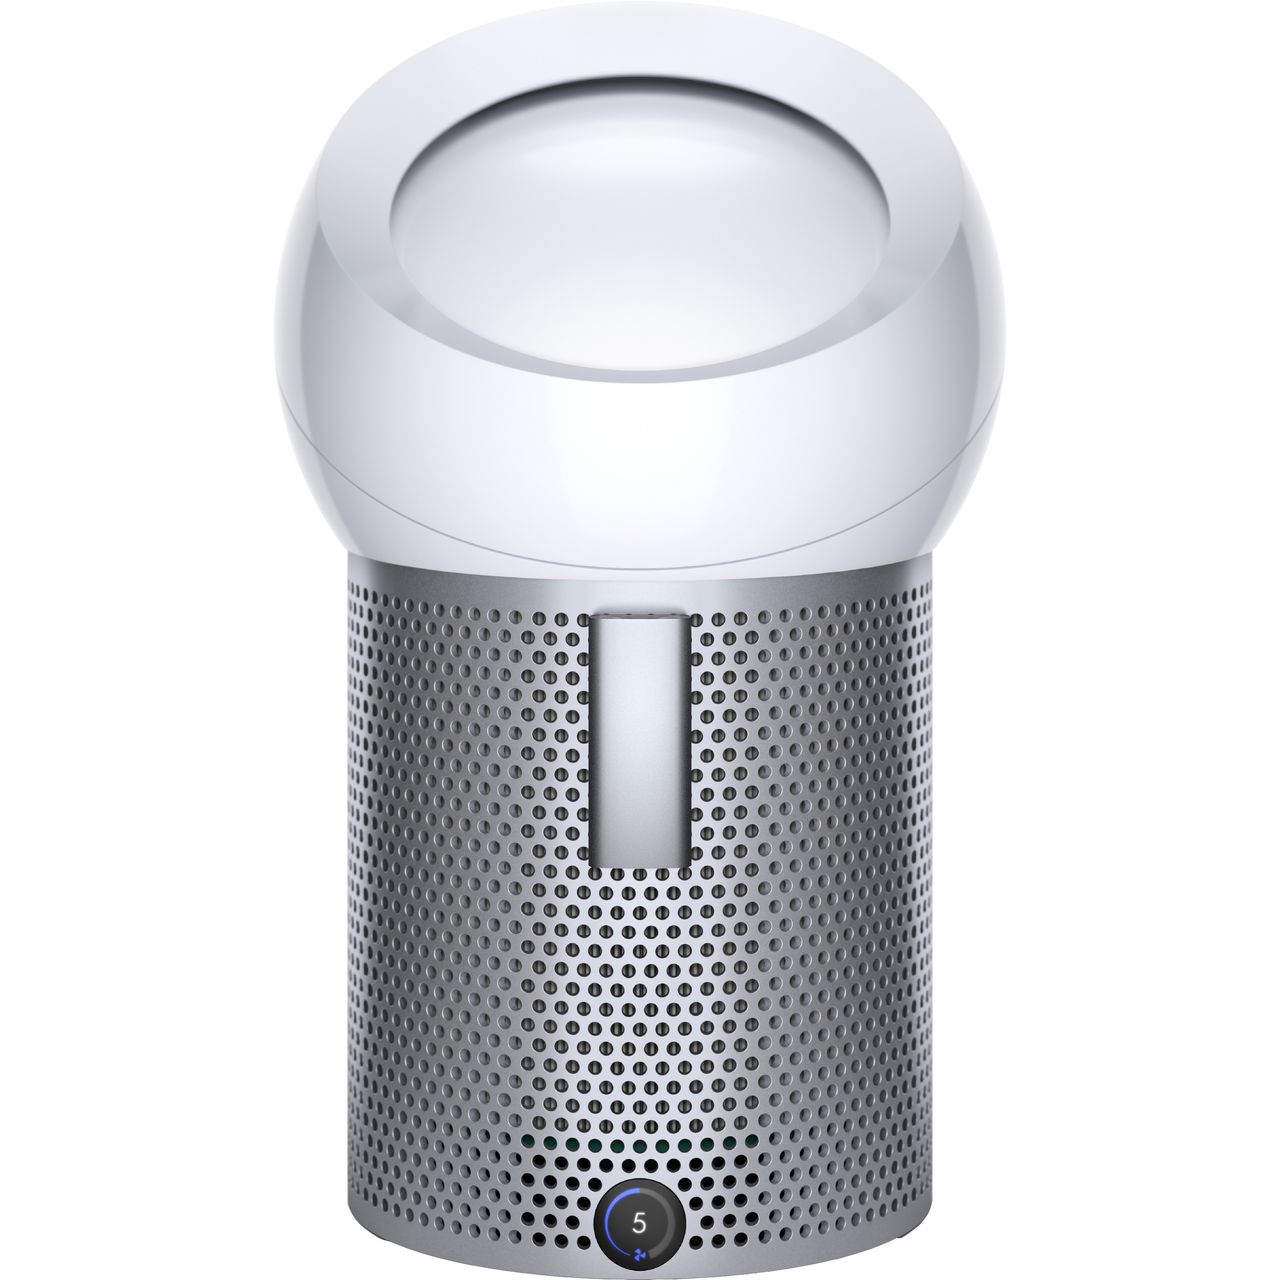 dyson fan and google home